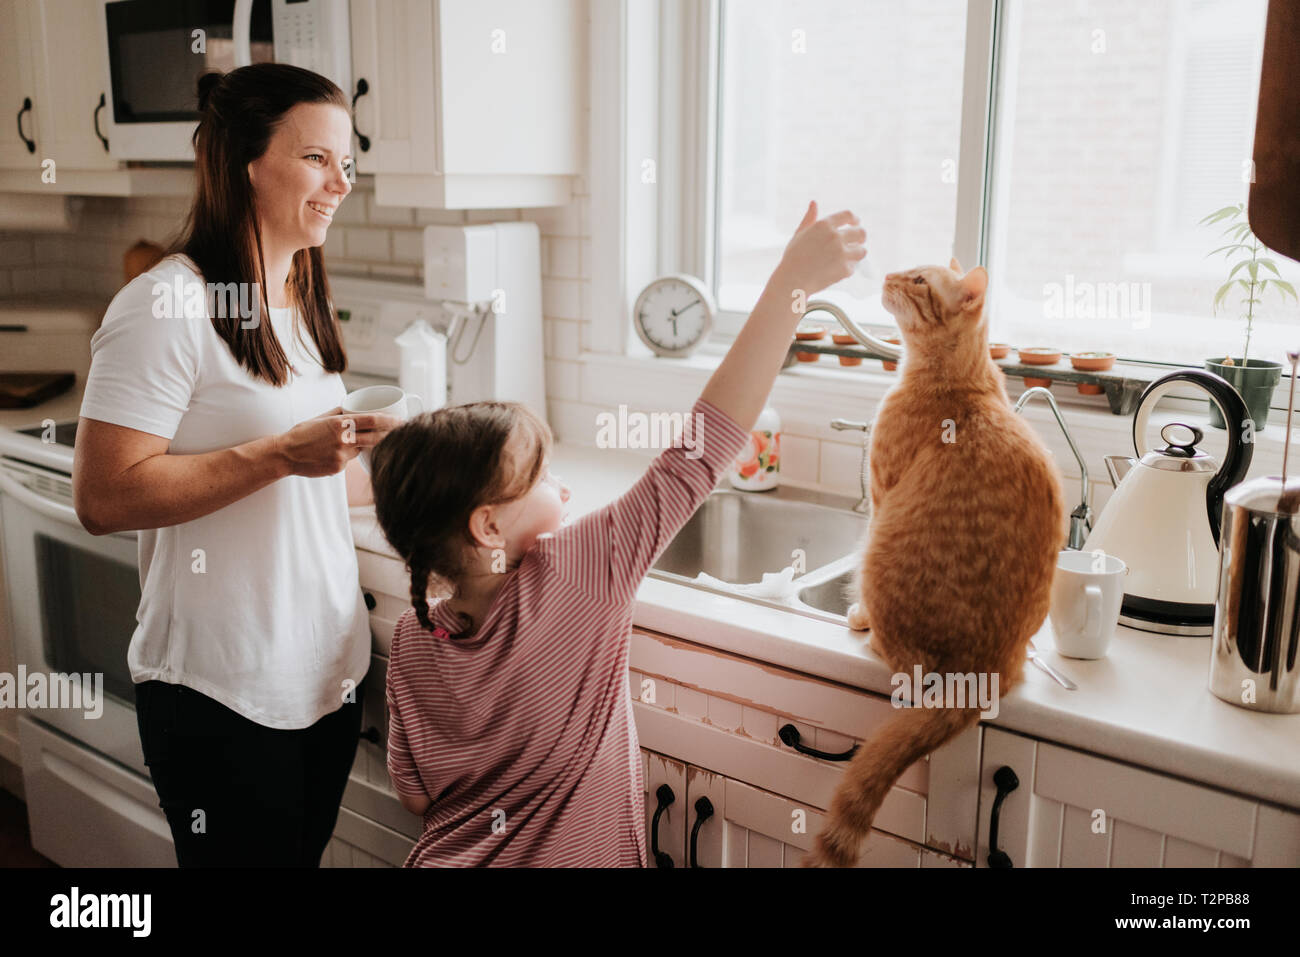 Mother watching daughter play with cat on kitchen worktop Stock Photo